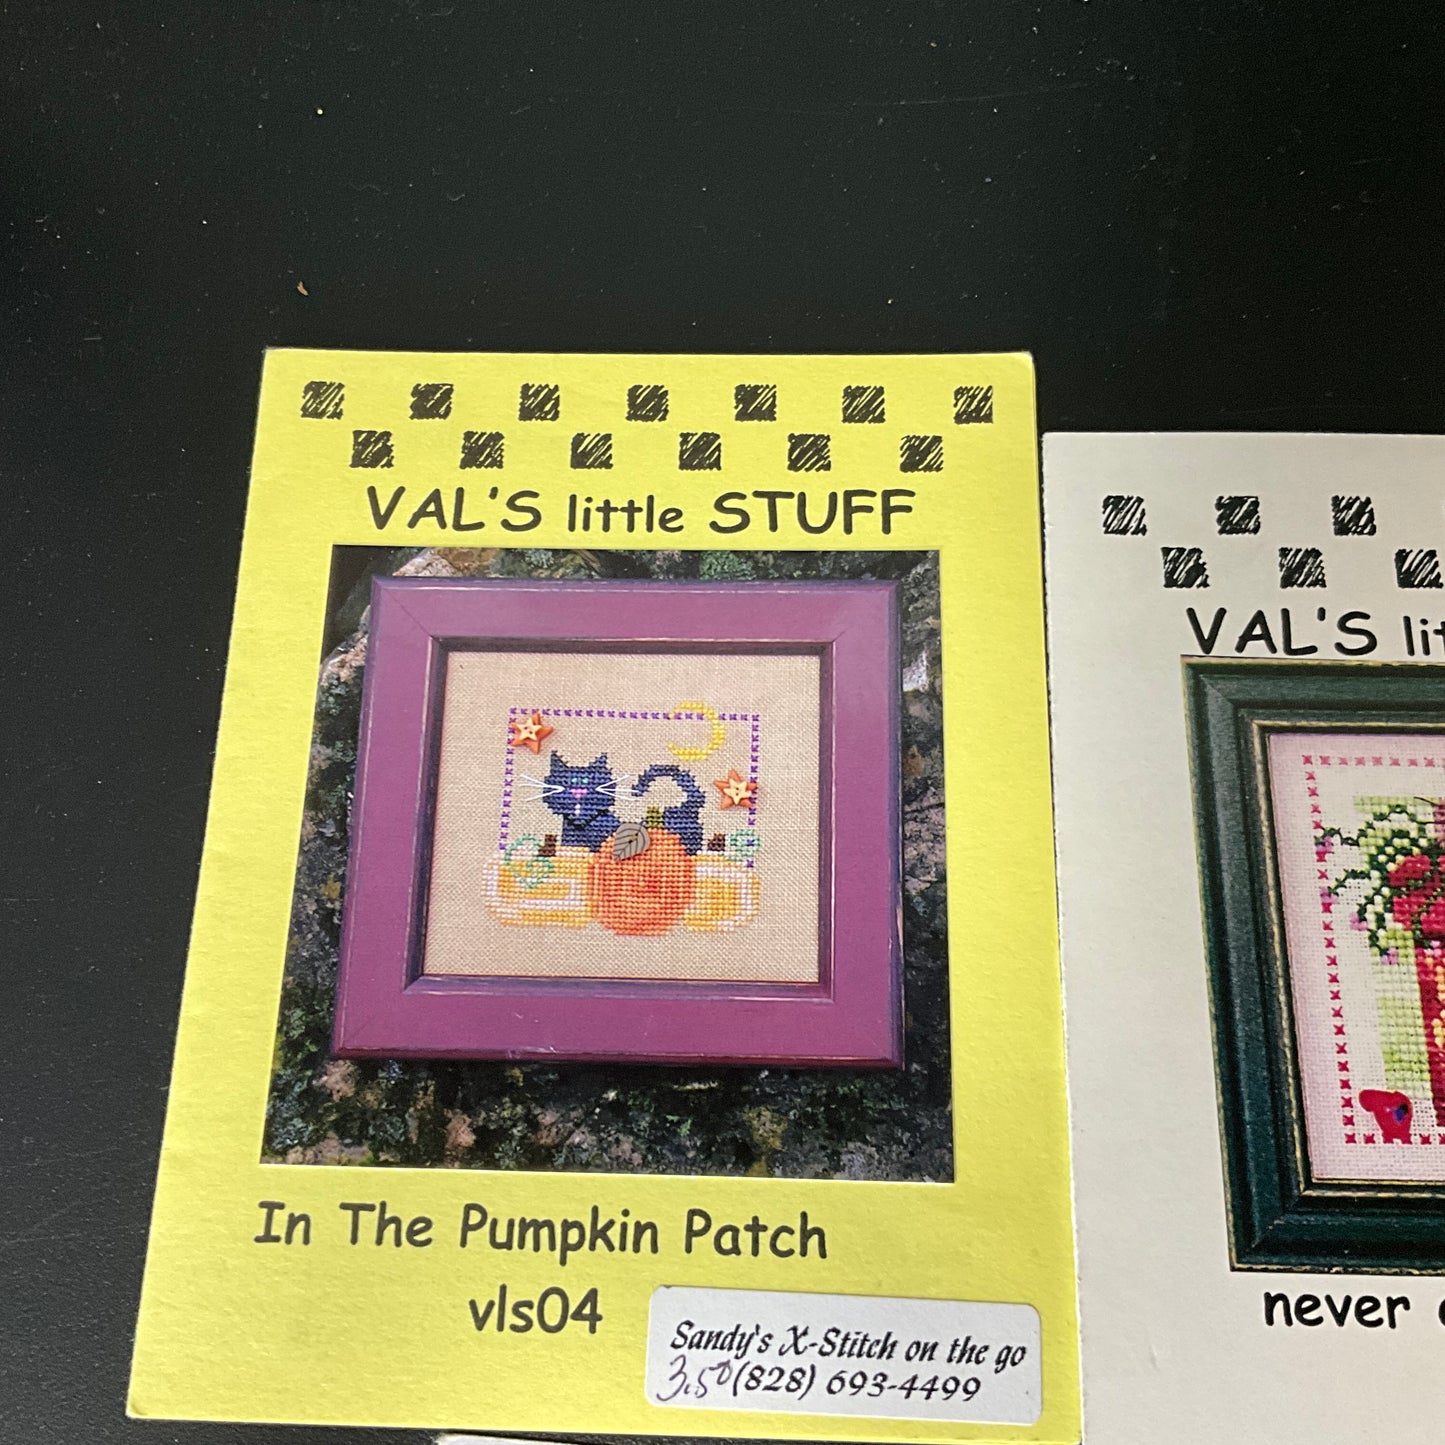 Val's little Stuff lot of 5 Cat cross stitch charts see pictures and description*